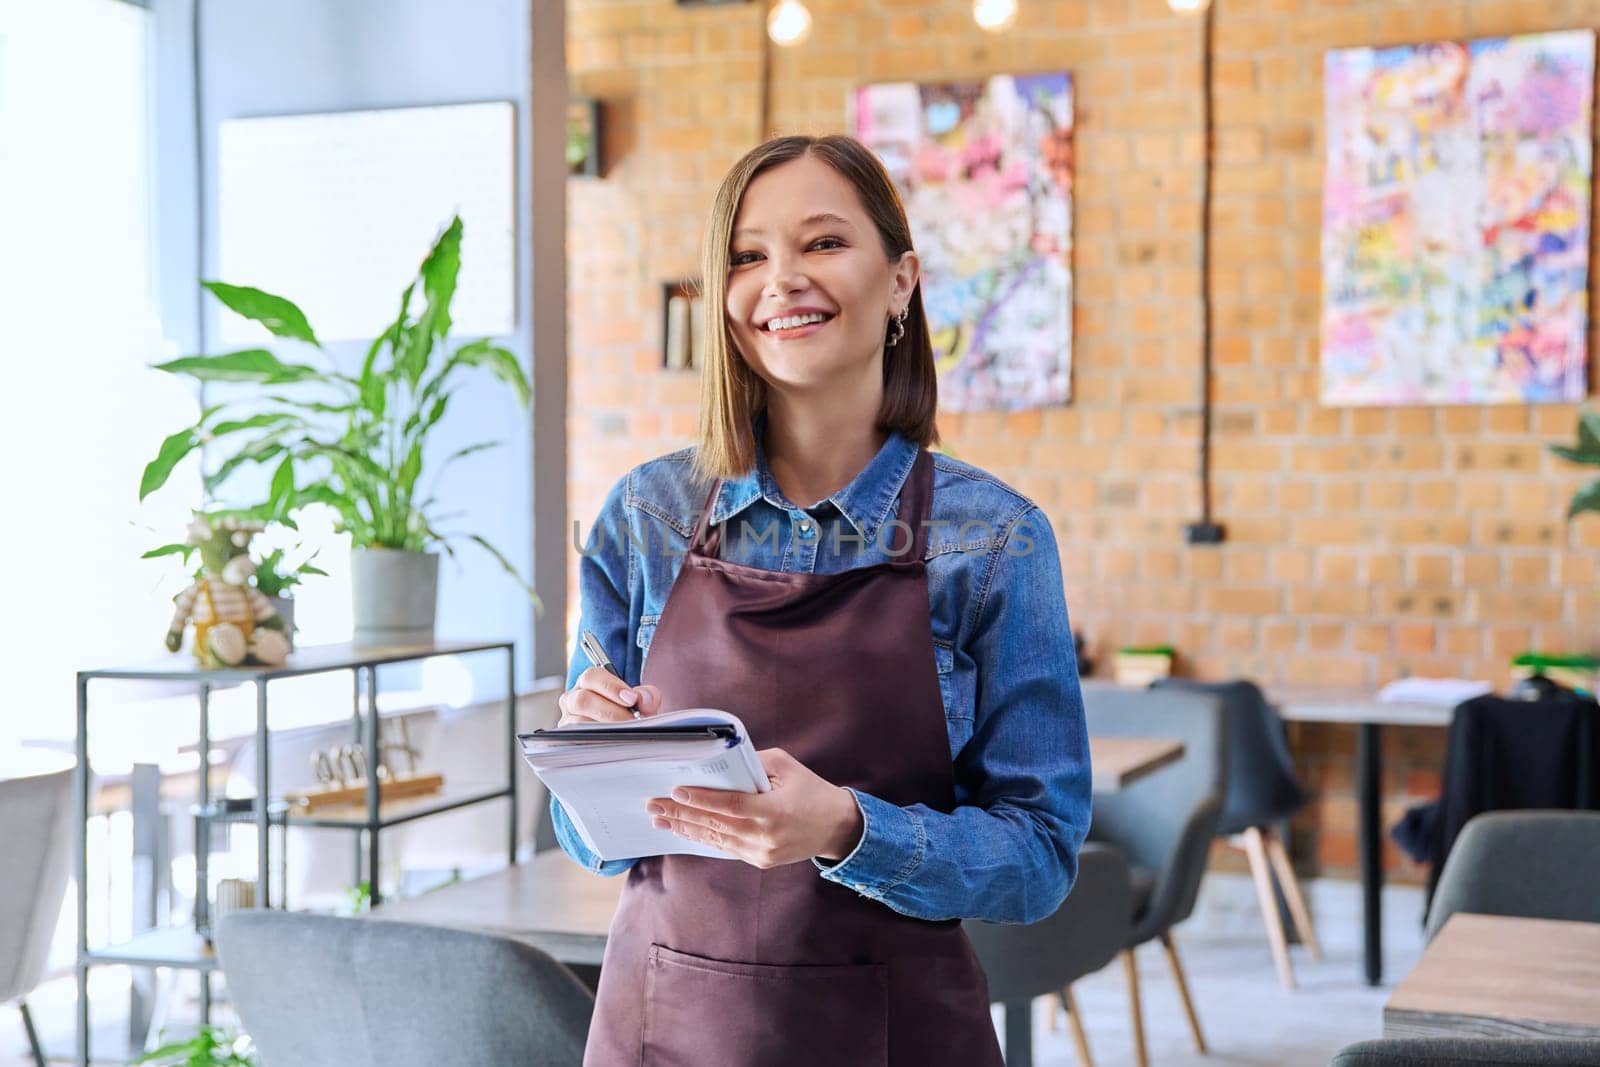 Successful young woman service worker owner in apron with working notepad pen looking at camera in restaurant cafeteria coffee pastry shop interior. Small business staff occupation entrepreneur work